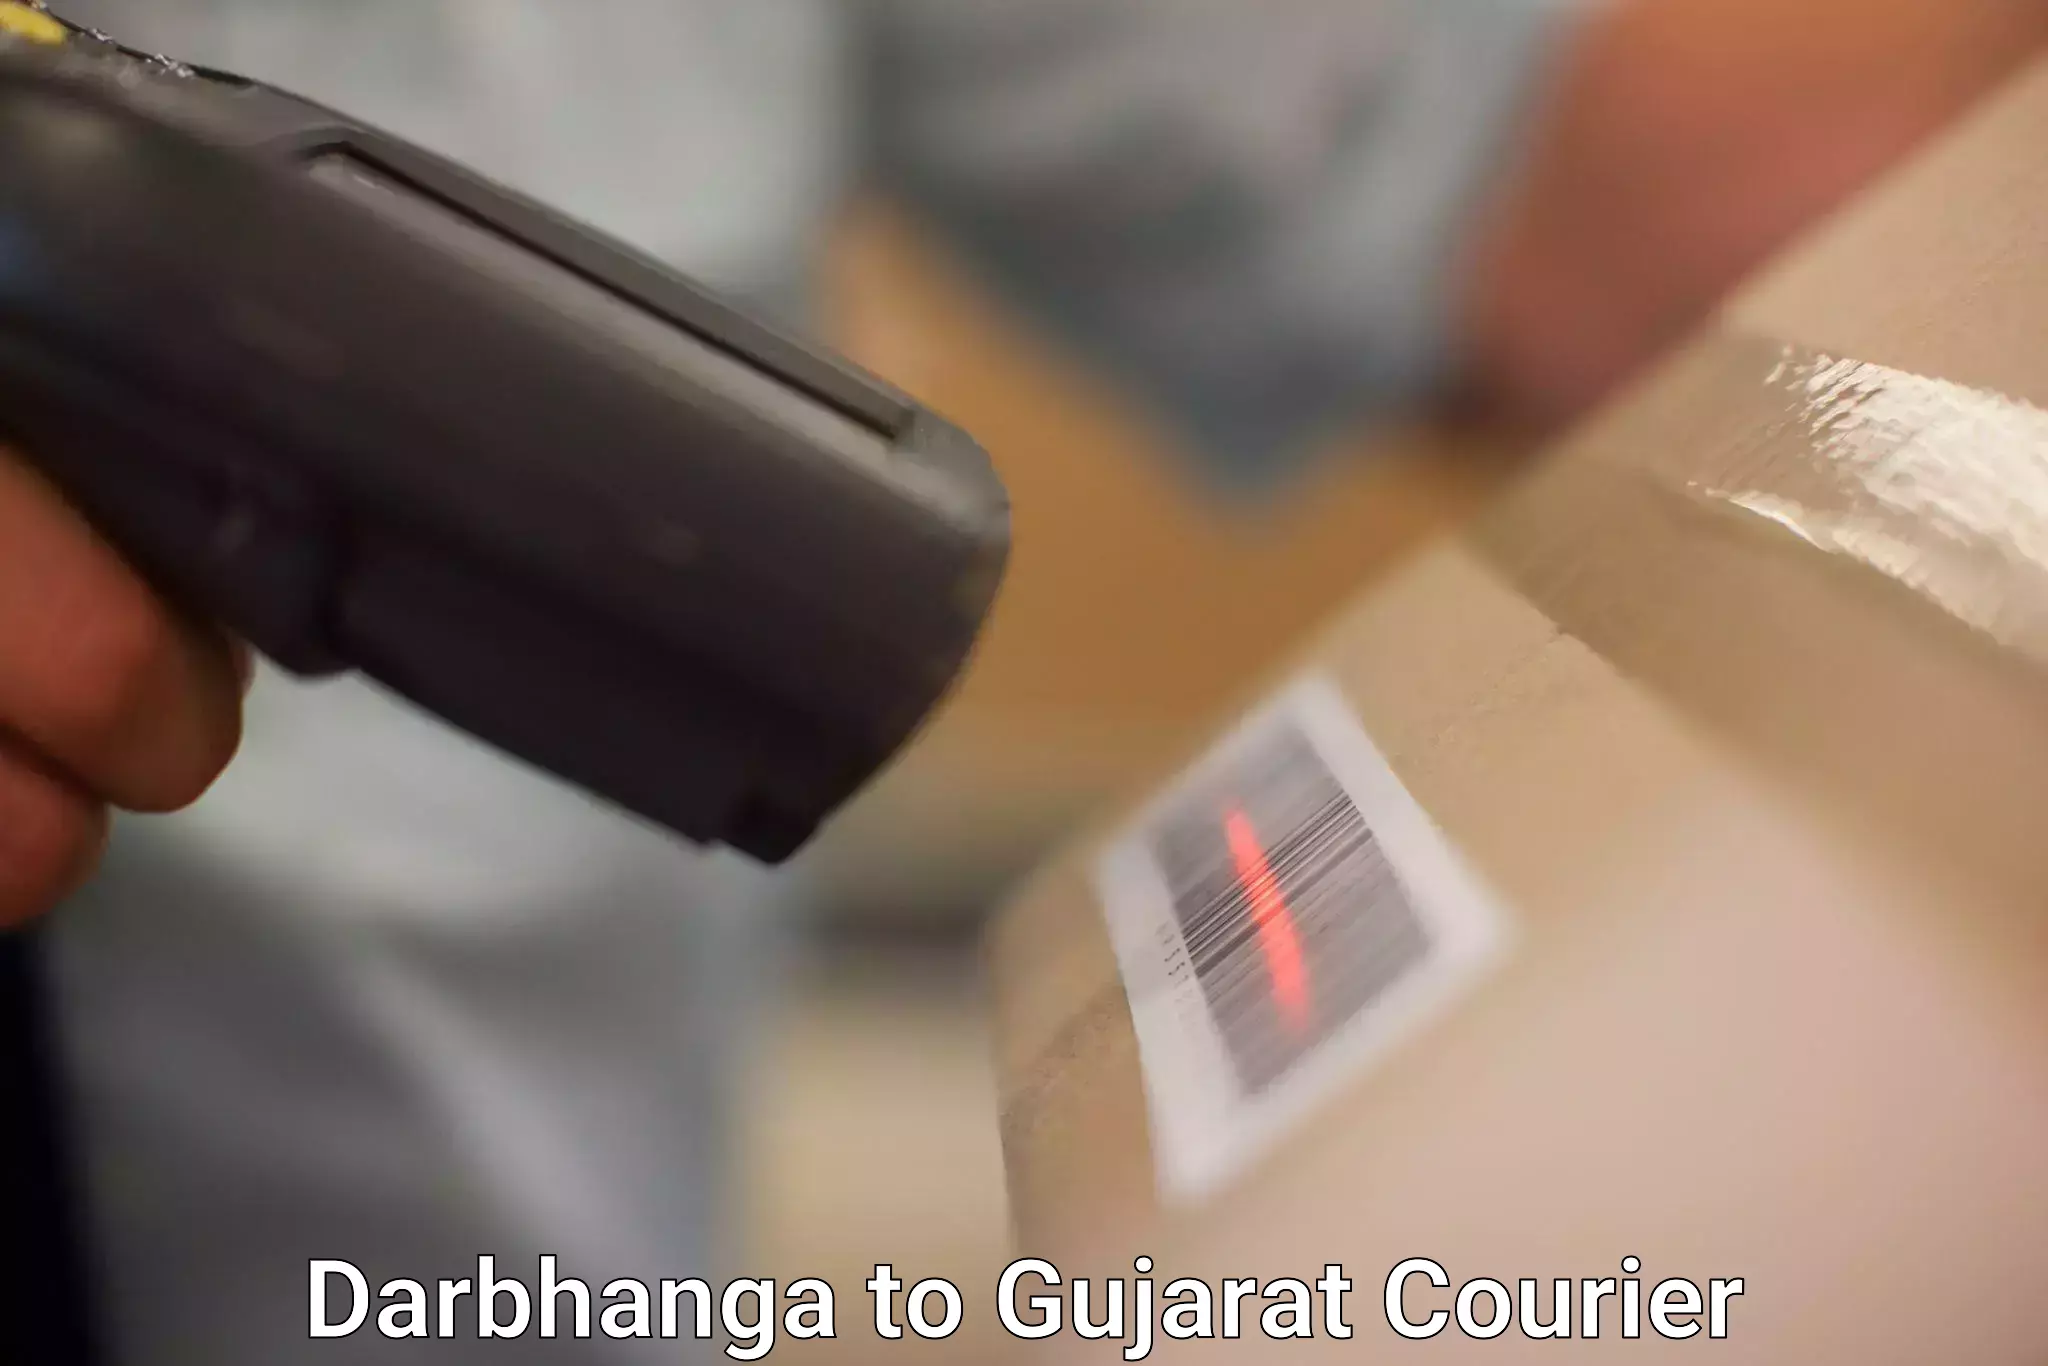 Quality courier services in Darbhanga to Ahwa